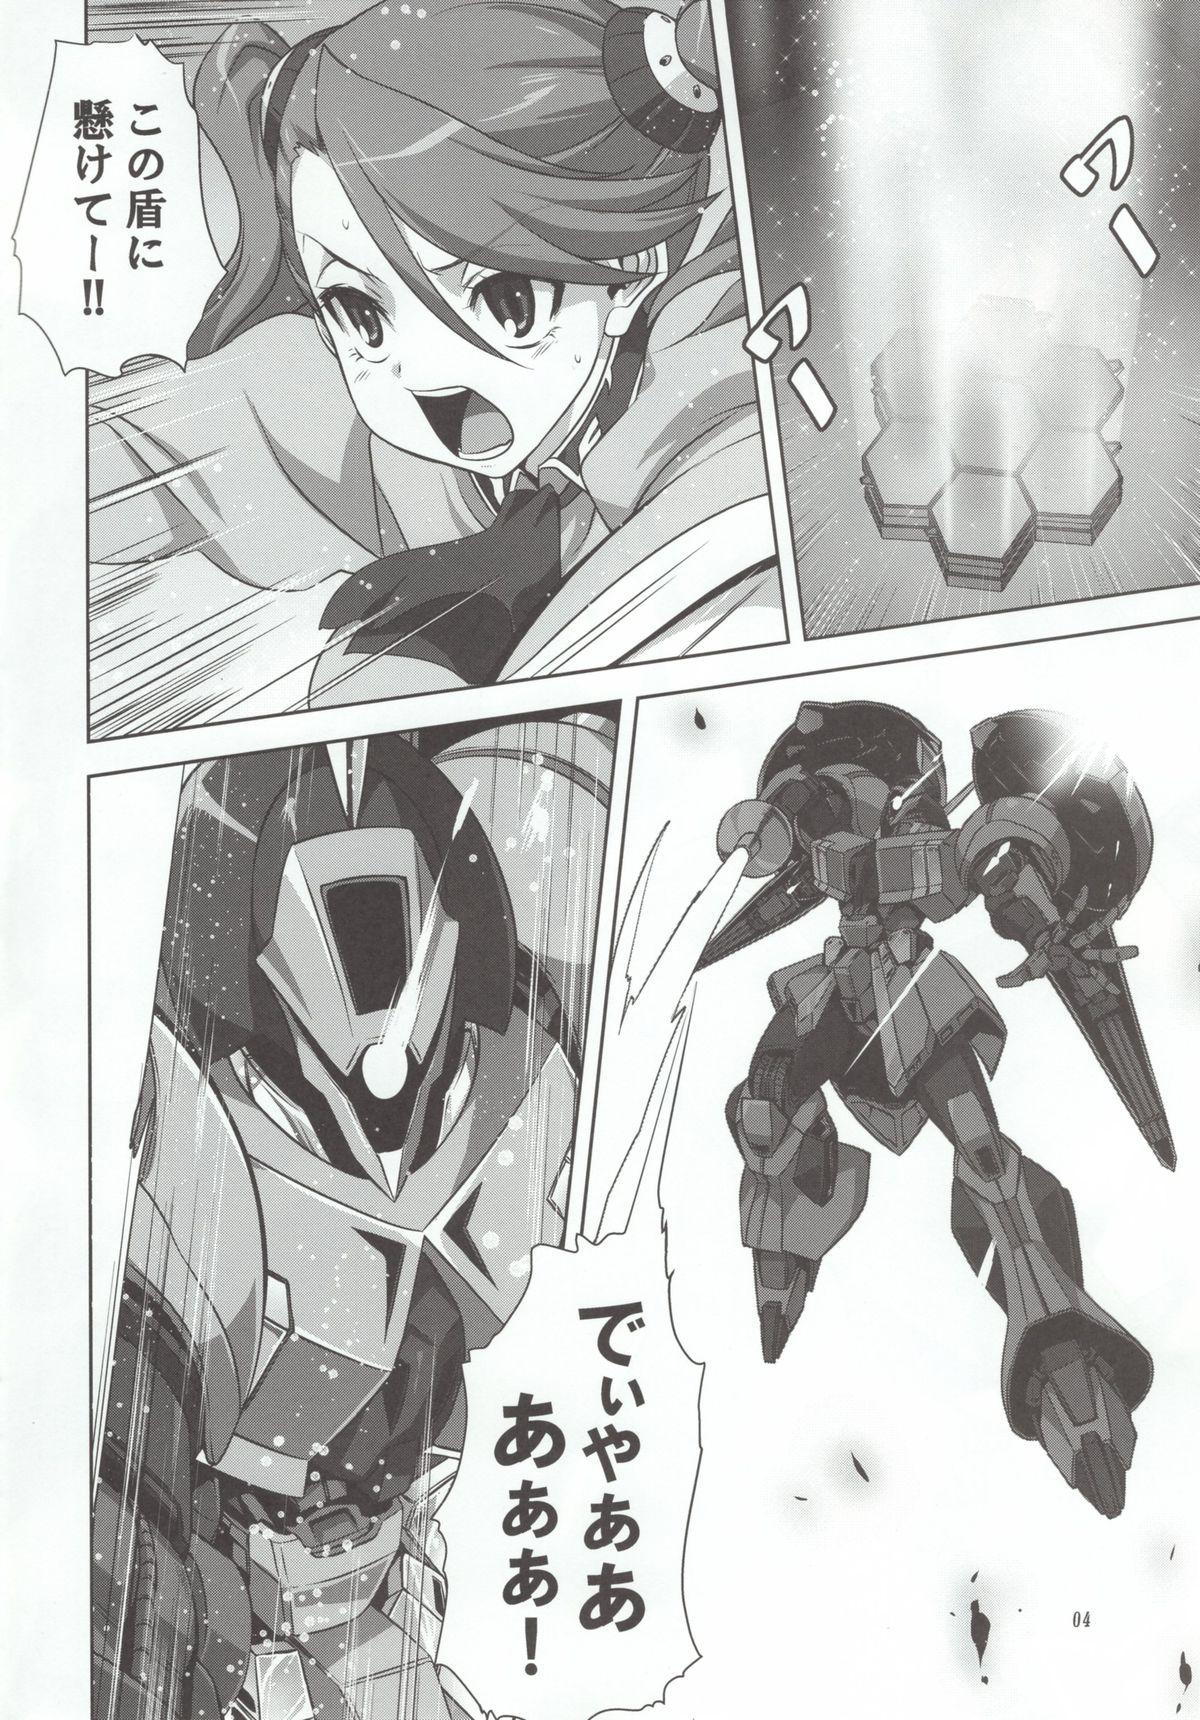 Hidden Camera Try Fight! - Gundam build fighters try Muscular - Page 4